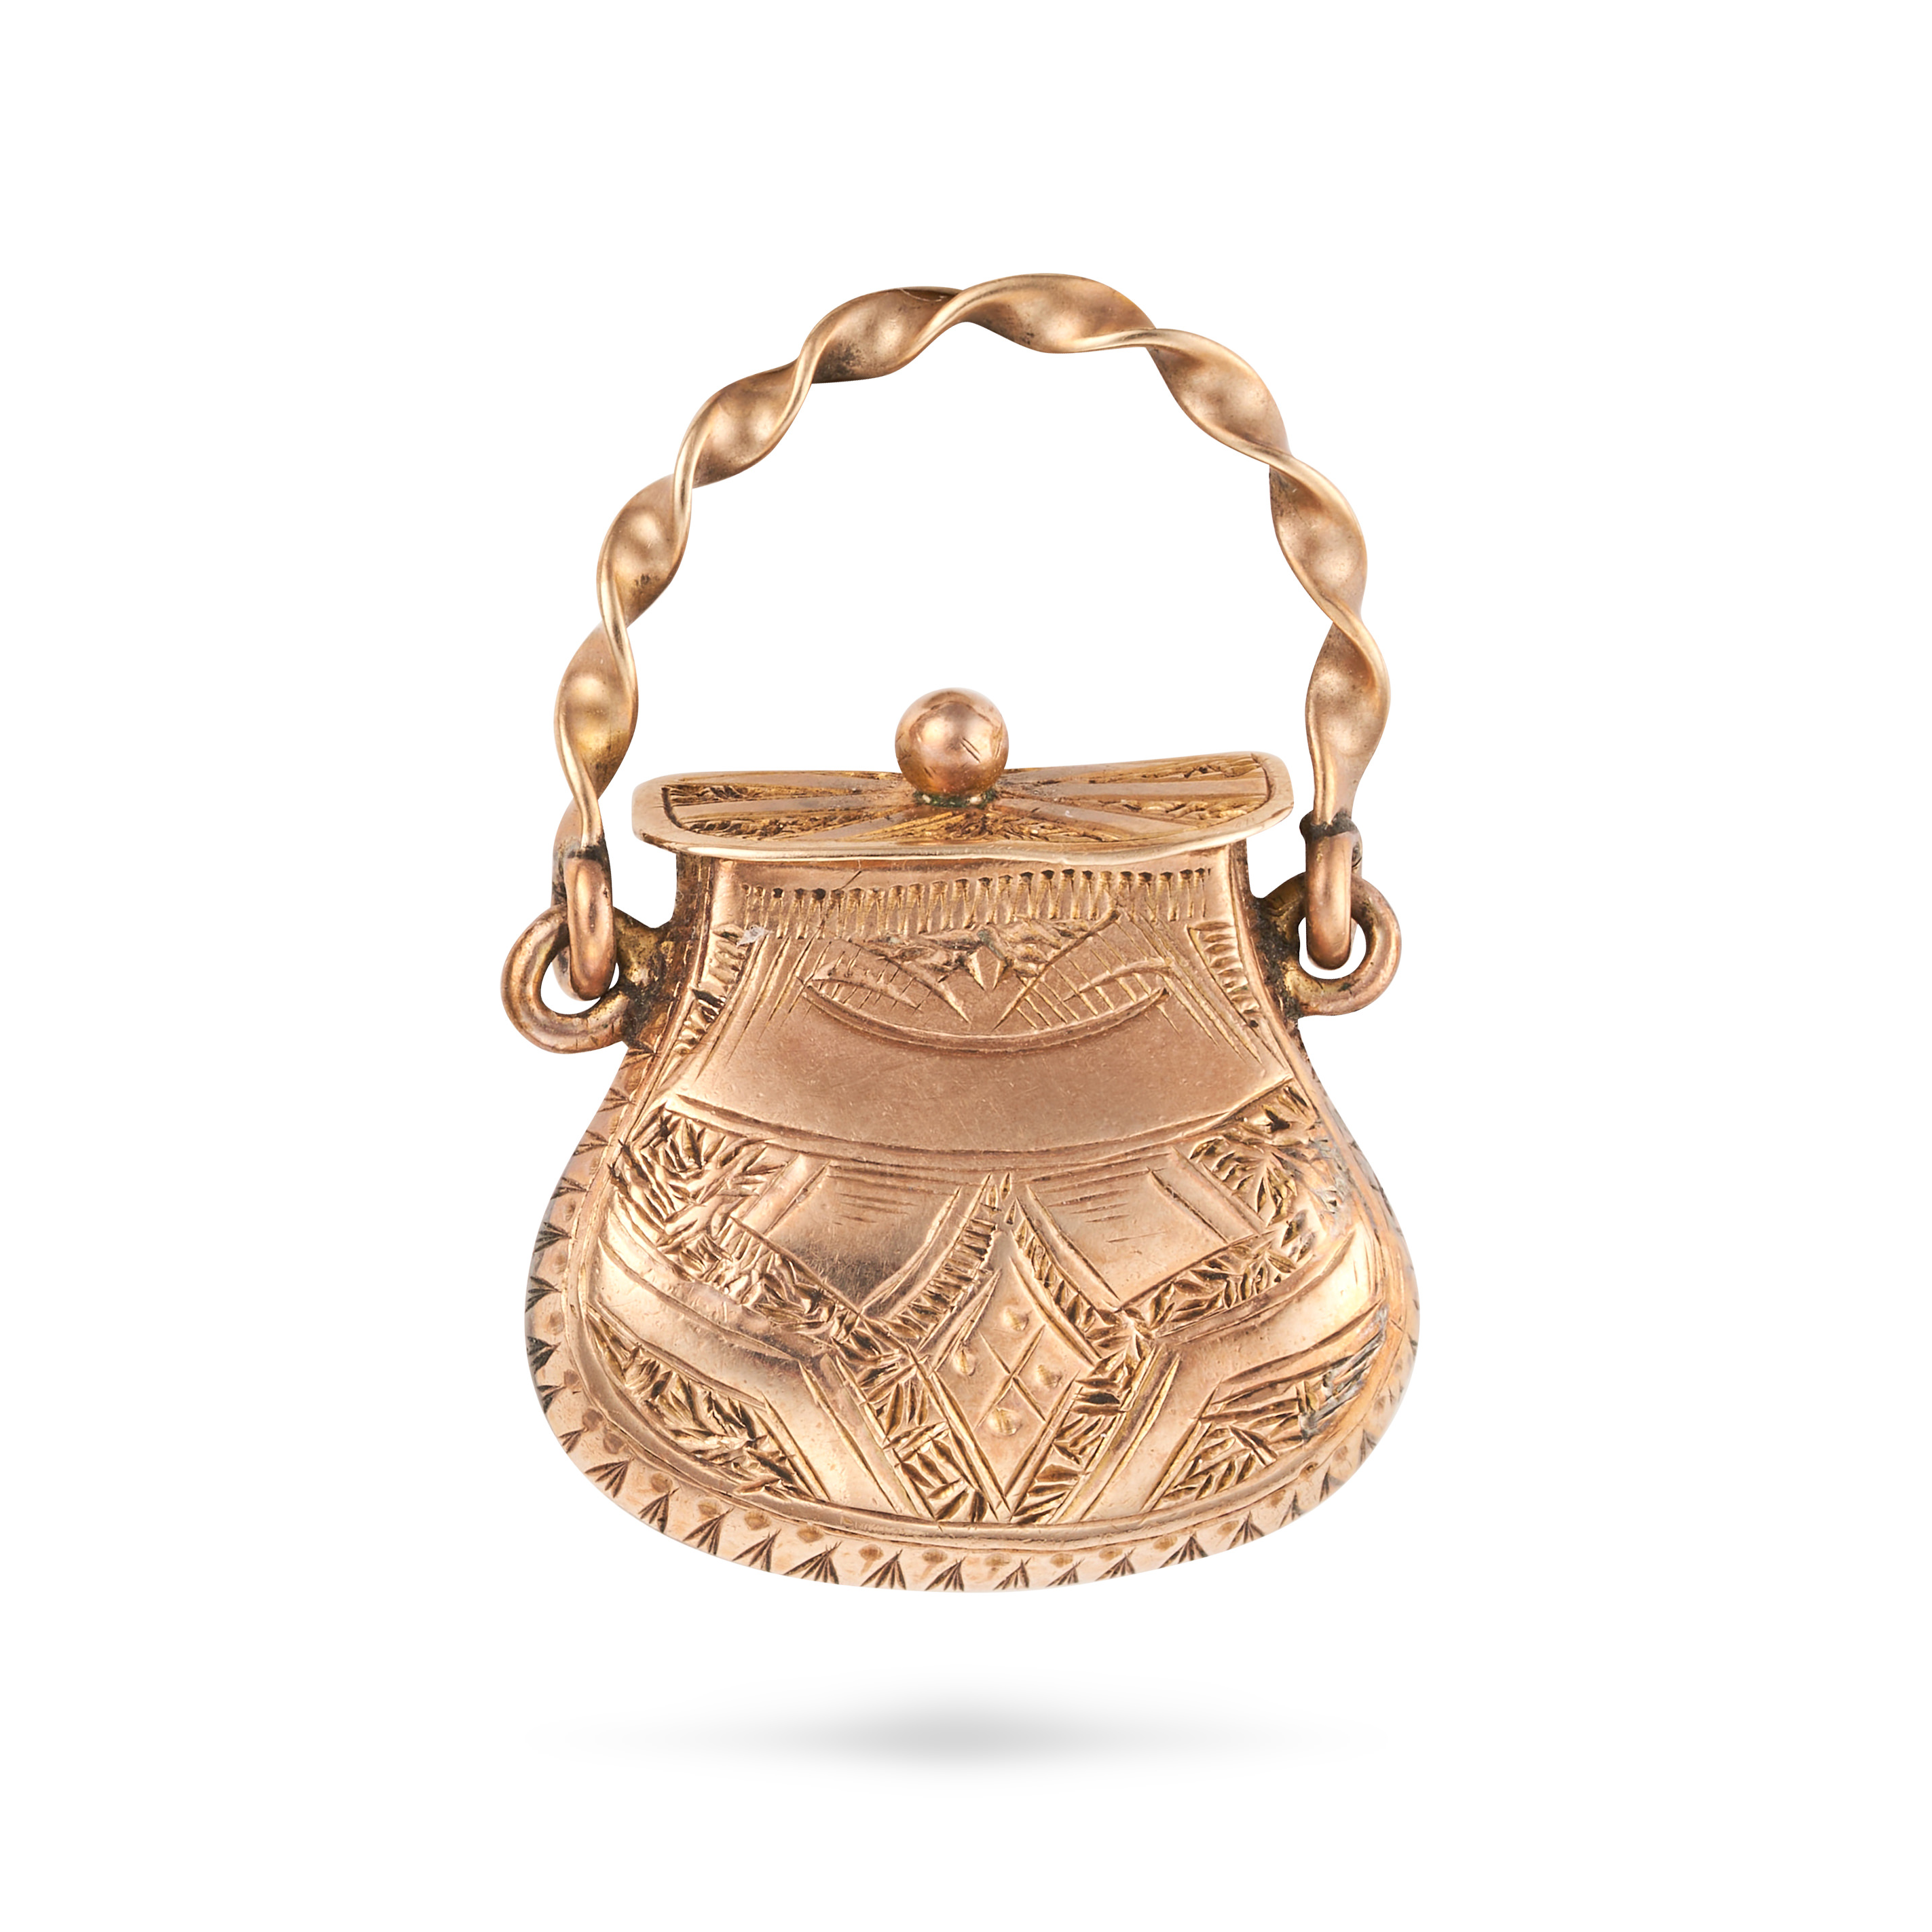 AN ANTIQUE PURSE CHARM / PENDANT designed as a purse, the hinged lid opening to reveal an inner c...